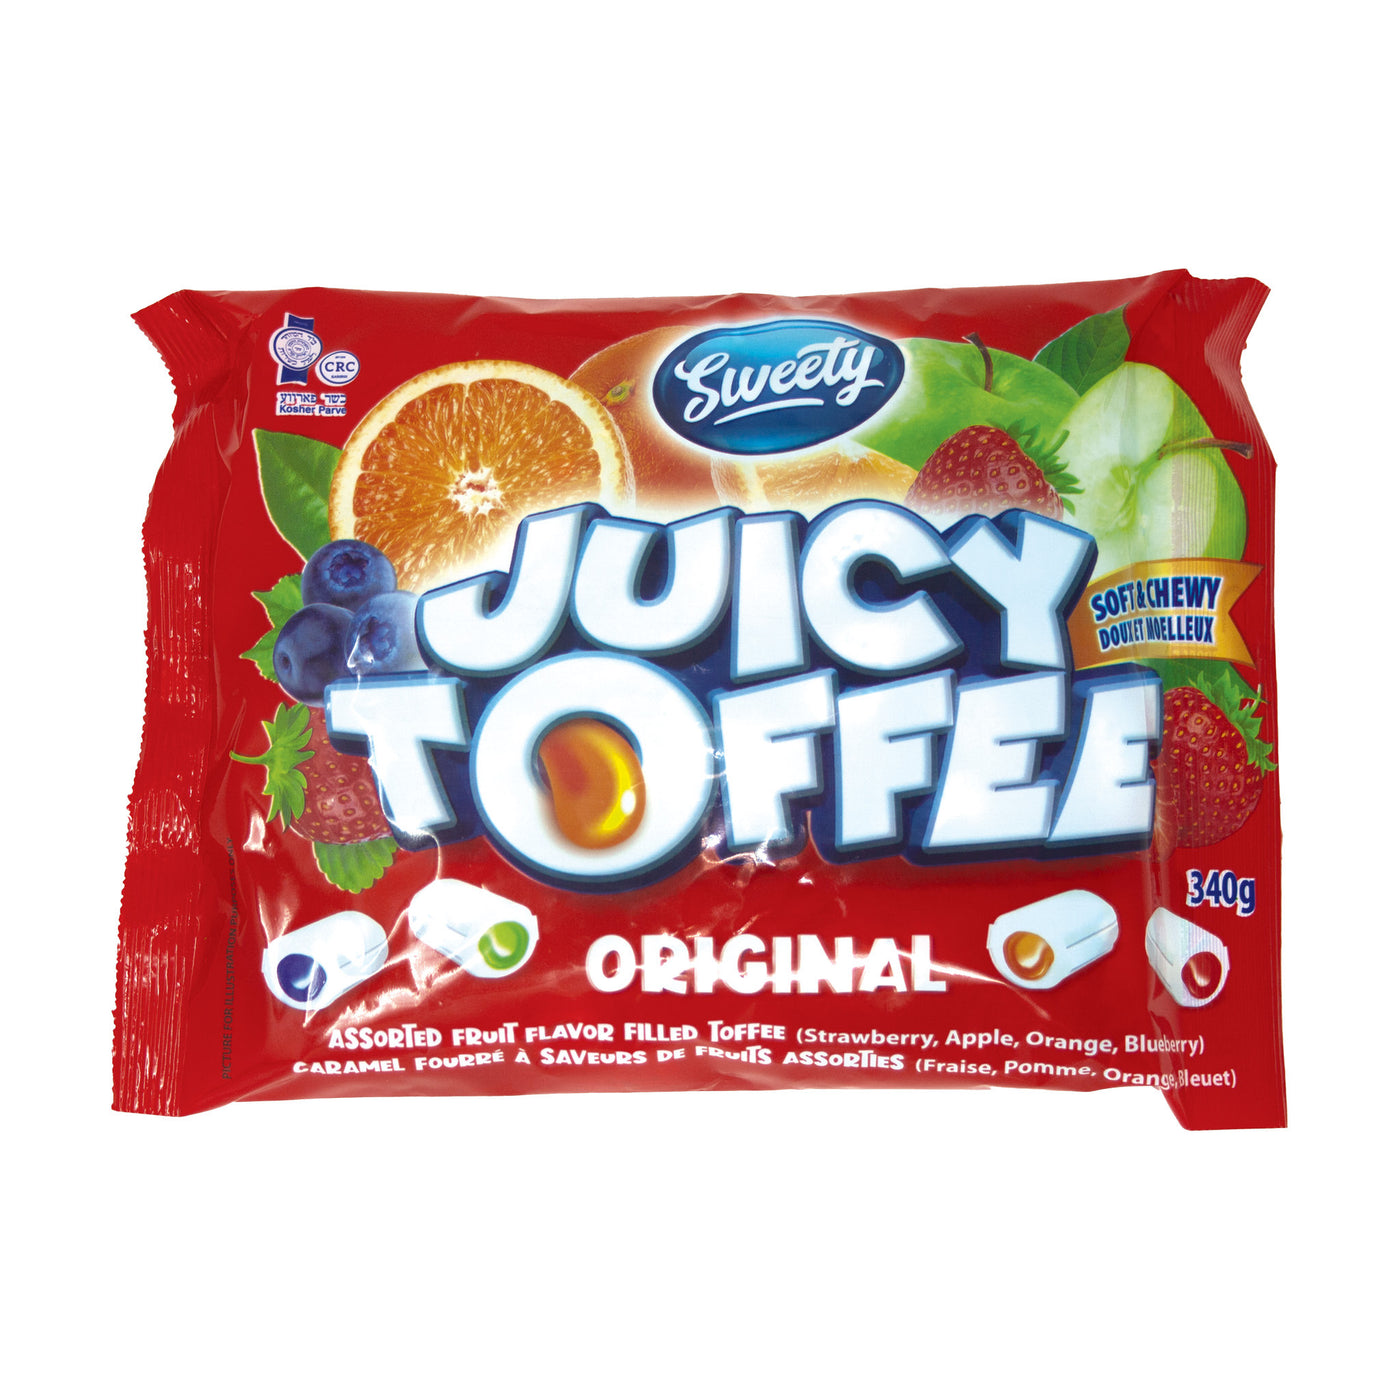 Assorted Fruit Flavor Filled Toffee